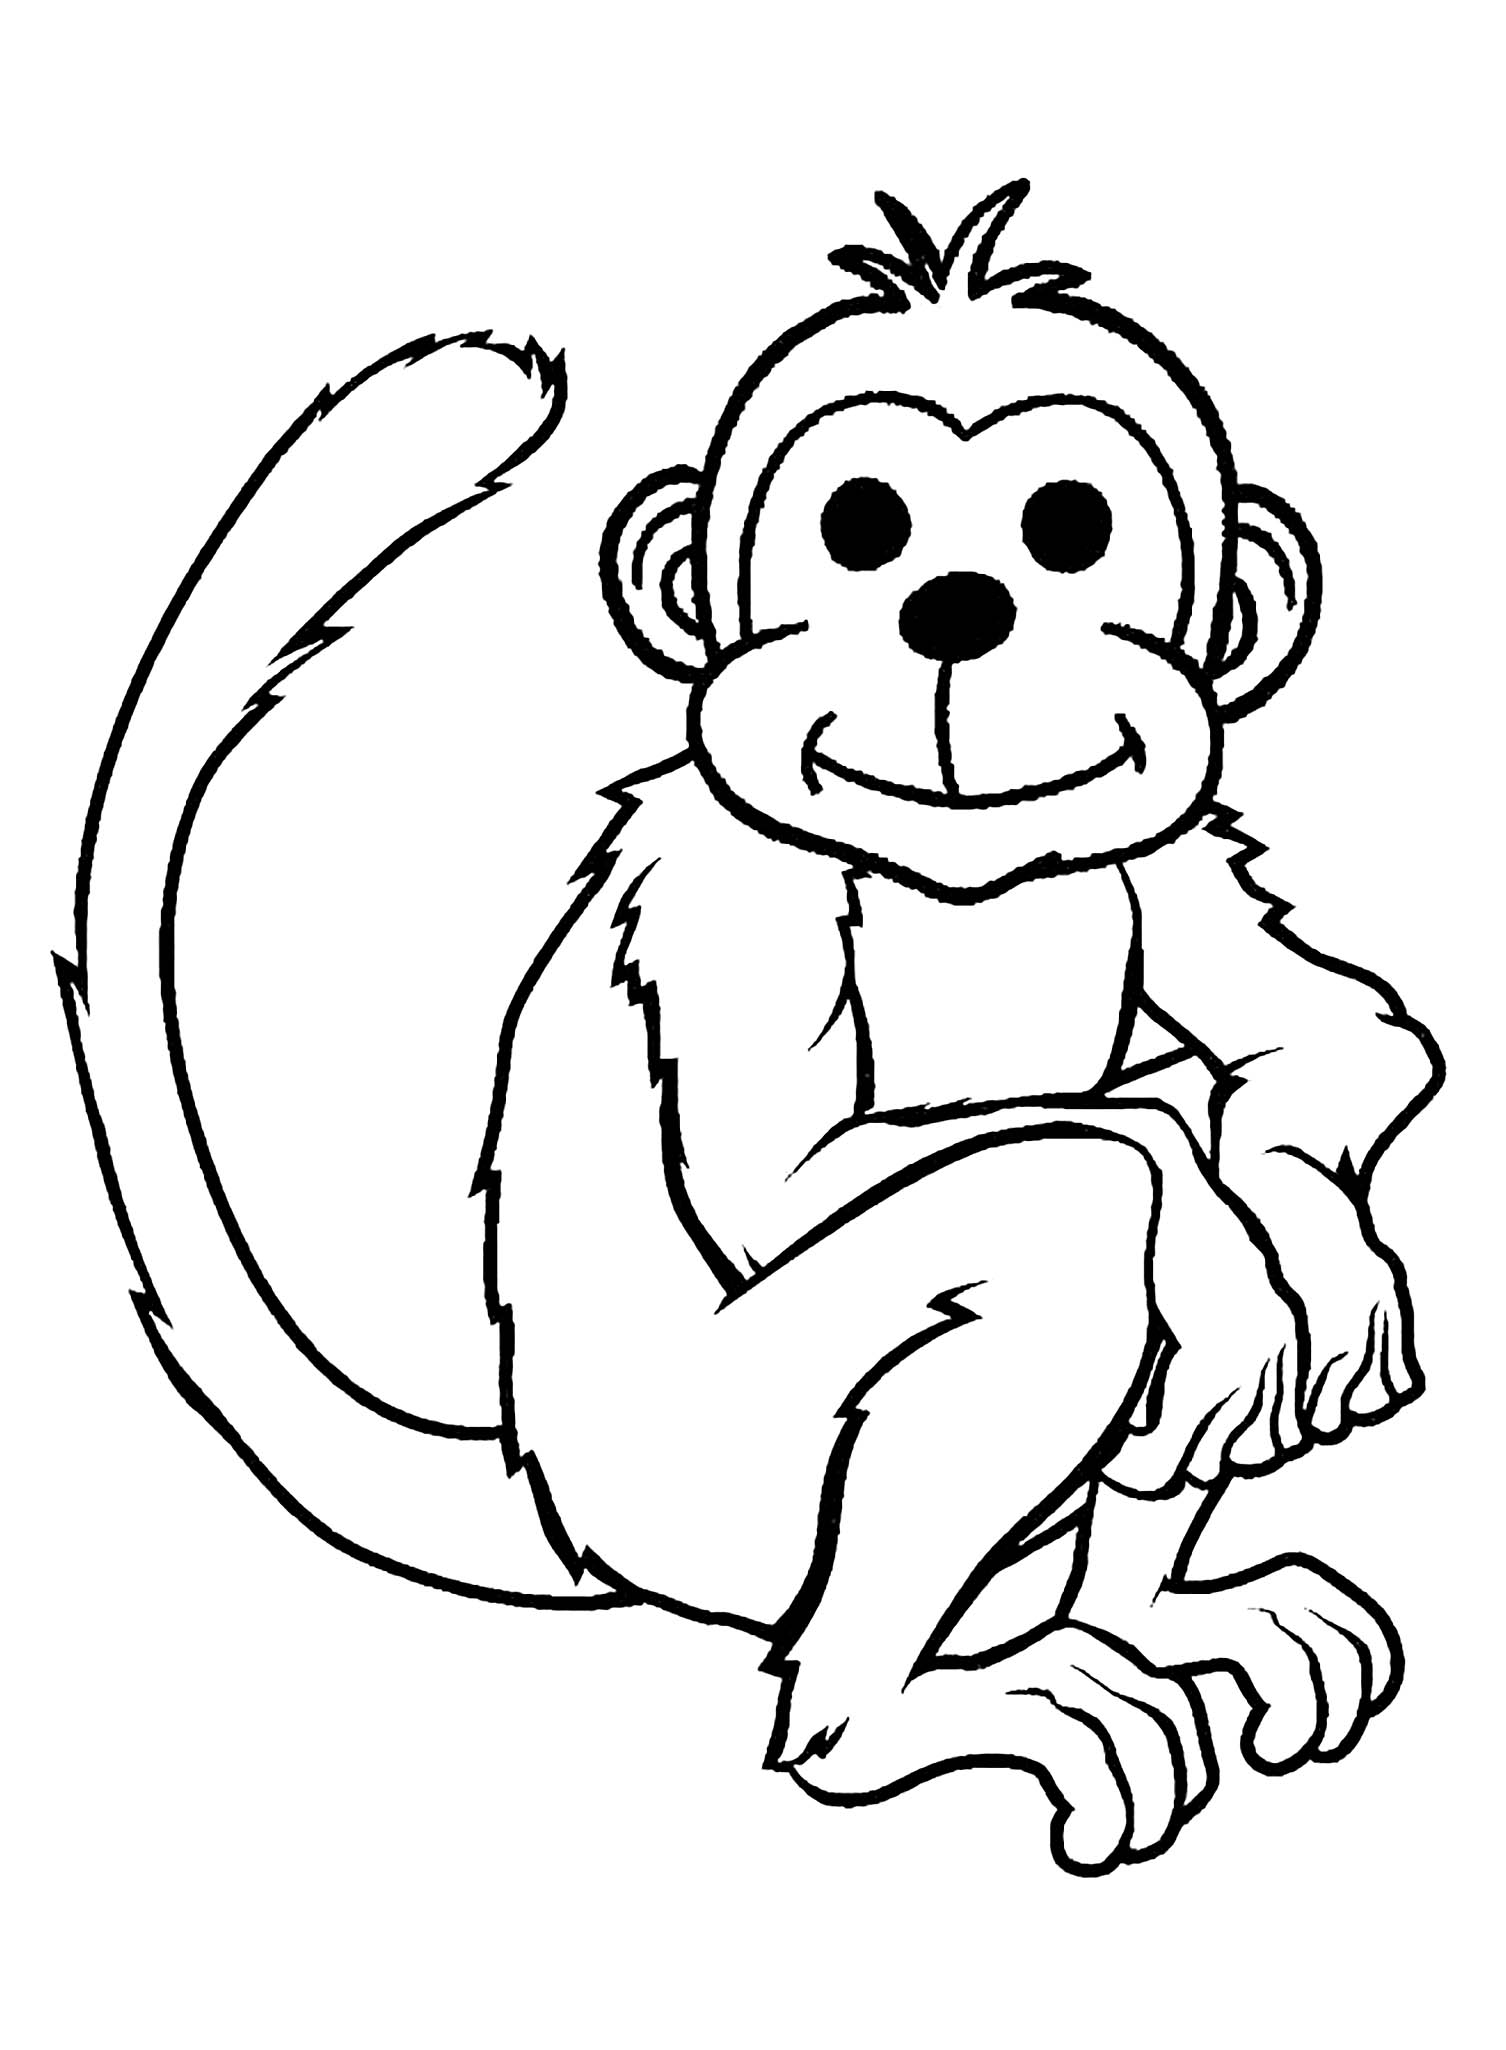 Monkey coloring pages to print - Monkeys Kids Coloring Pages